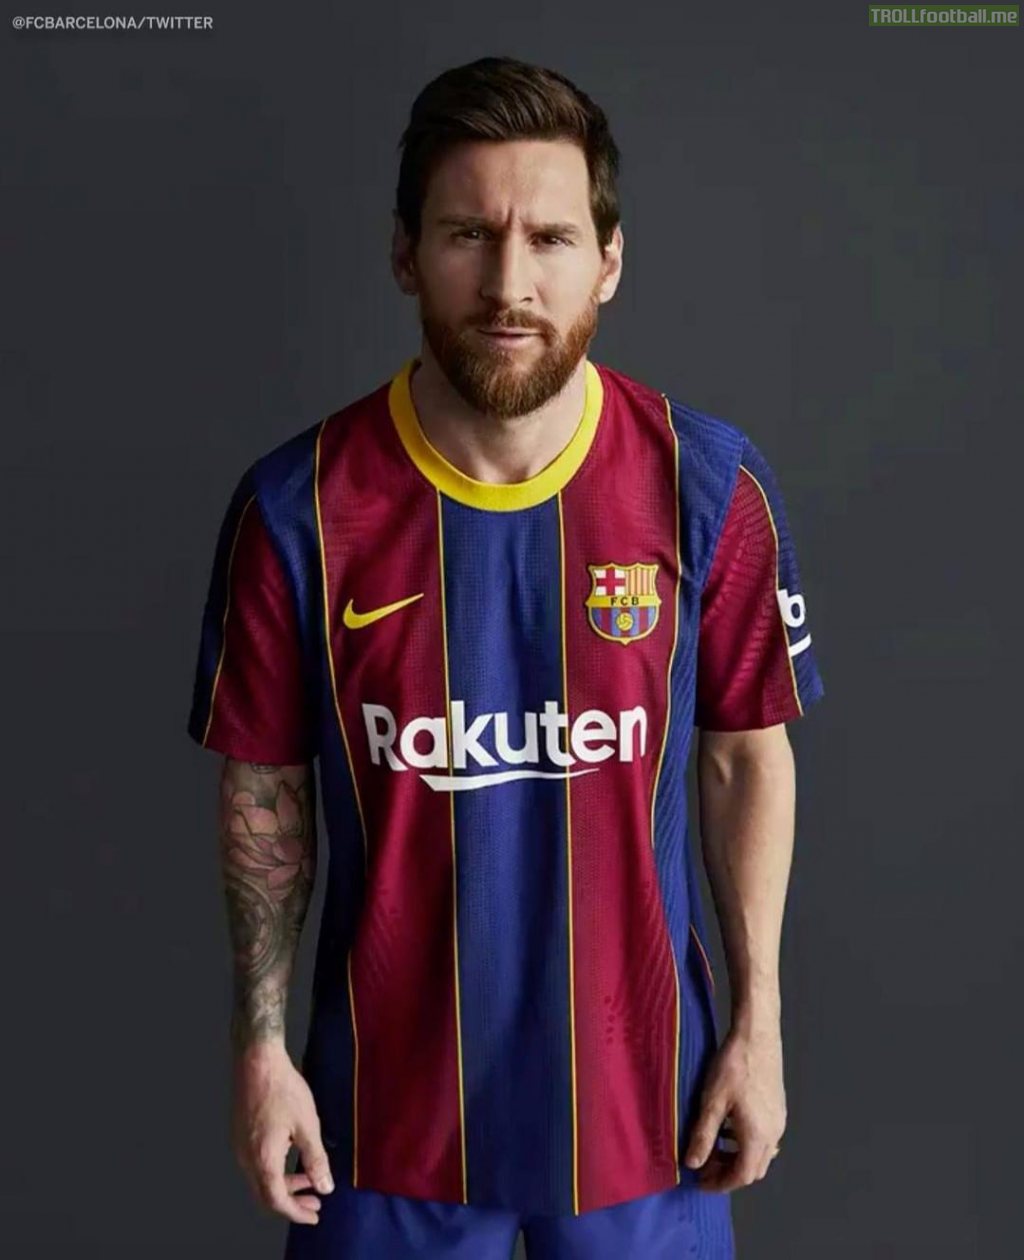 Barcelona have revealed their new home kit for the 2020-21 season😍